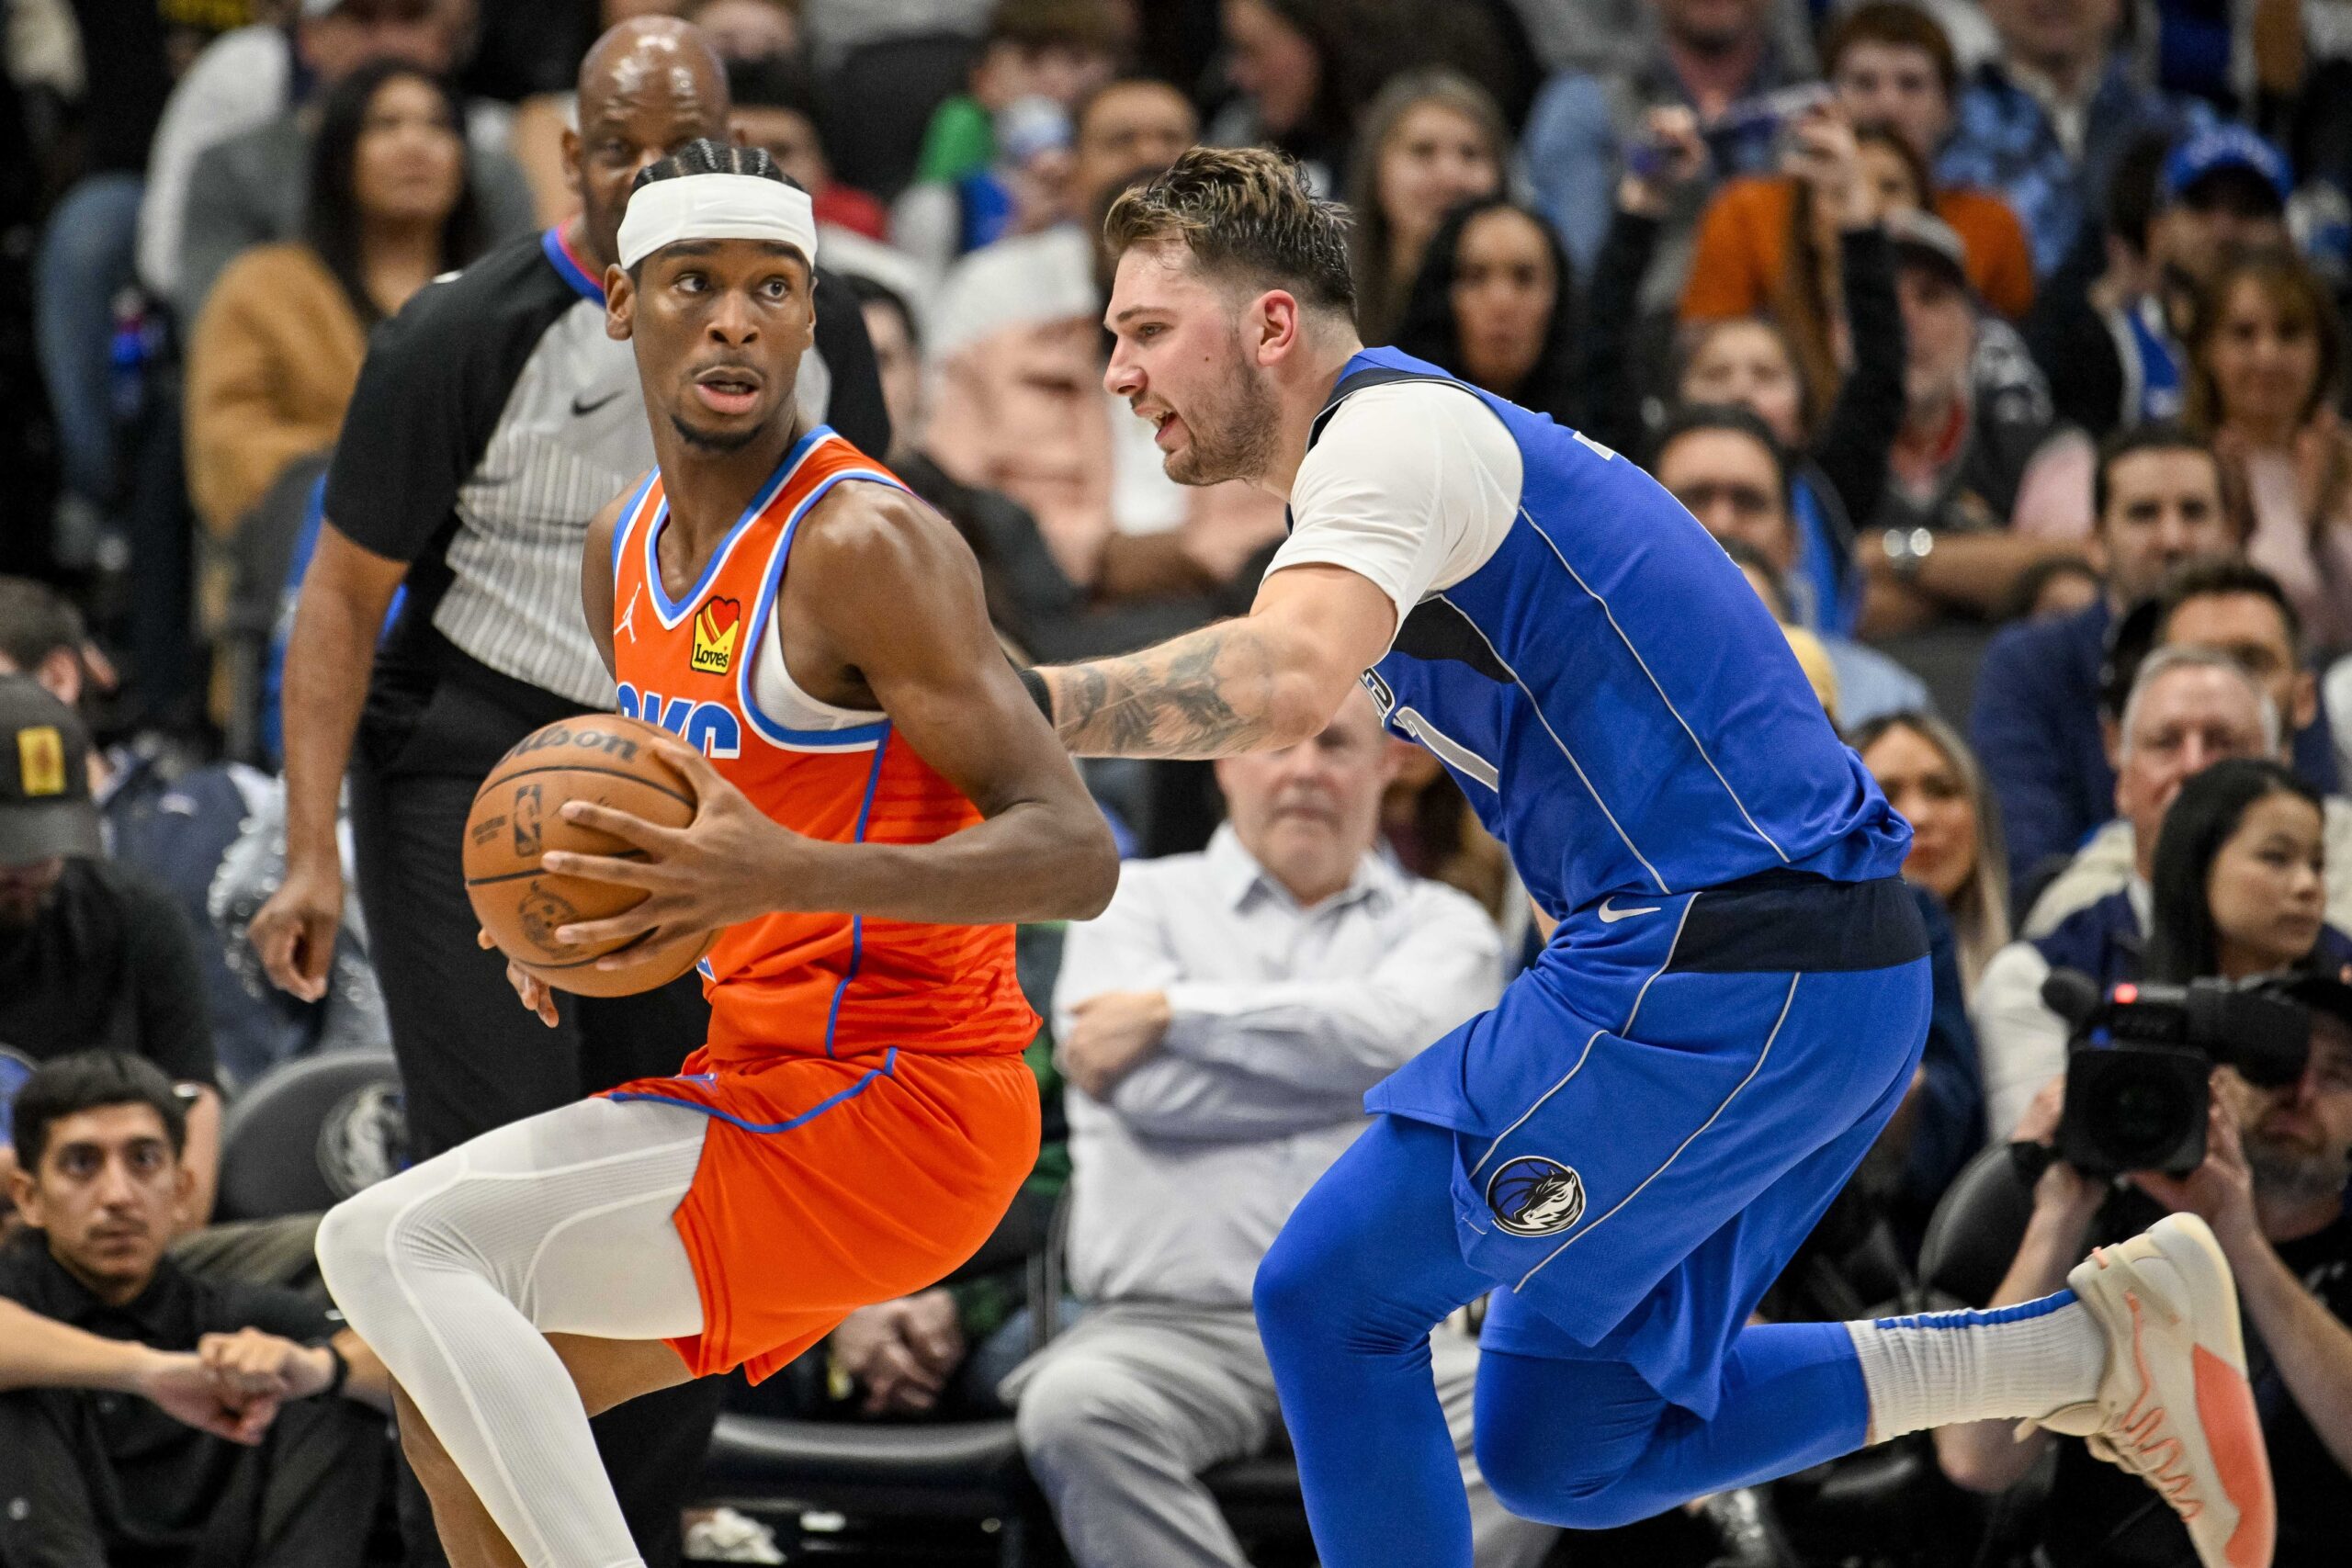 Dec 2, 2023; Dallas, Texas, USA; Oklahoma City Thunder guard Shai Gilgeous-Alexander (2) and Dallas Mavericks guard Luka Doncic (77) in action during the game between the Dallas Mavericks and the Oklahoma City Thunder at the American Airlines Center. Mandatory Credit: Jerome Miron-USA TODAY Sports